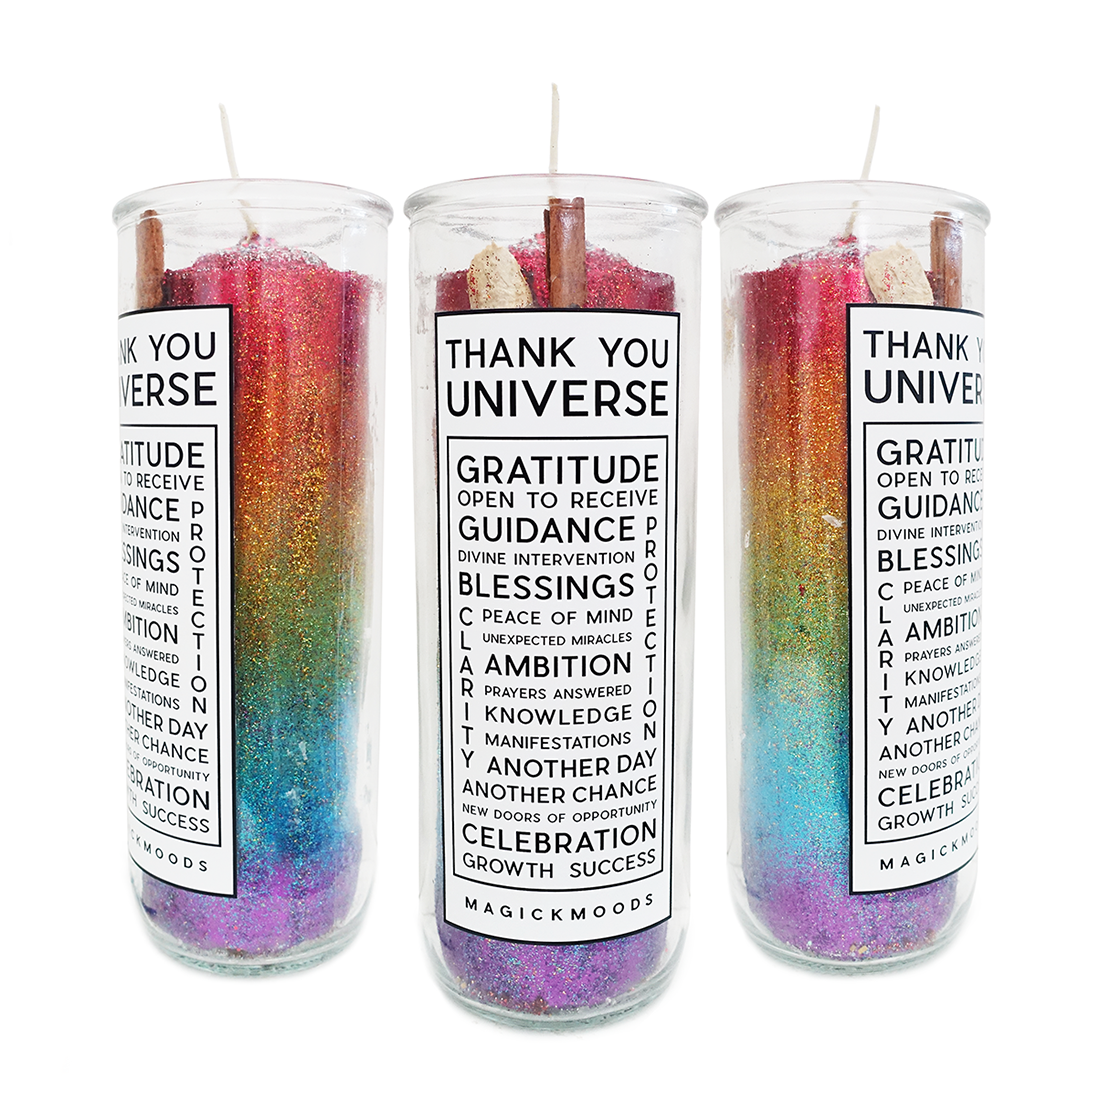 Thank You Universe 7-Day Meditation Candle - PREORDER - Ships by 04/28